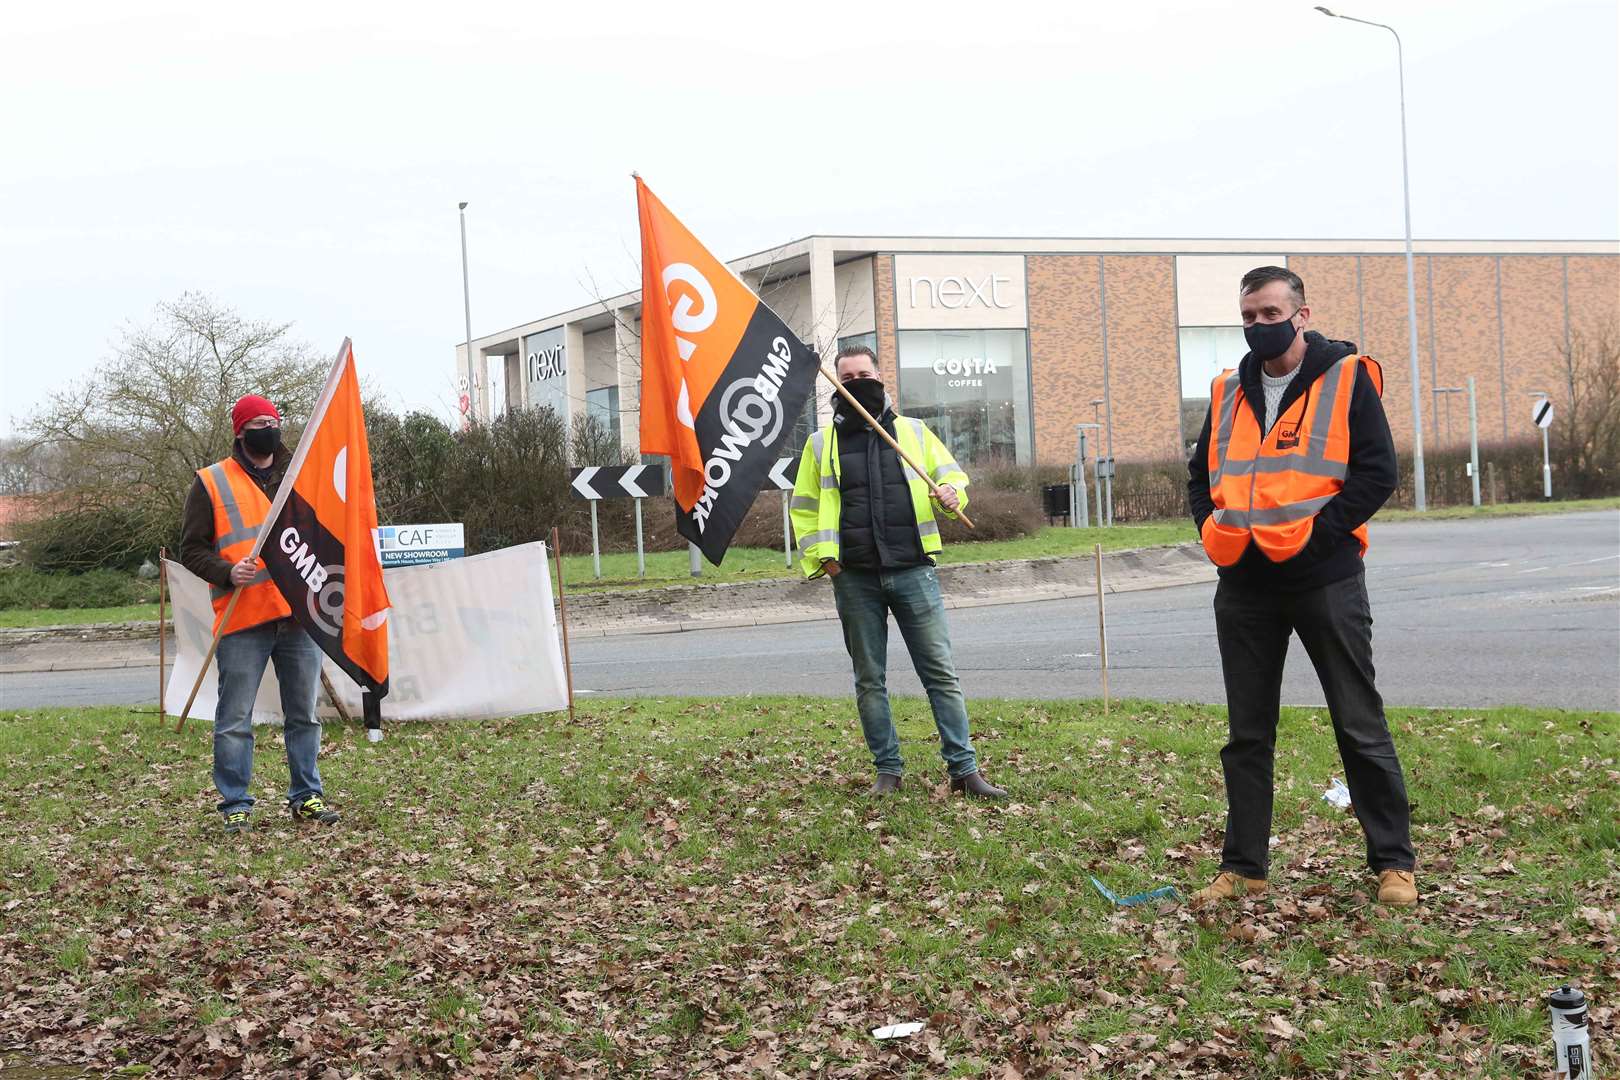 A socially distanced protest in Maidstone. Picture: UKNiP